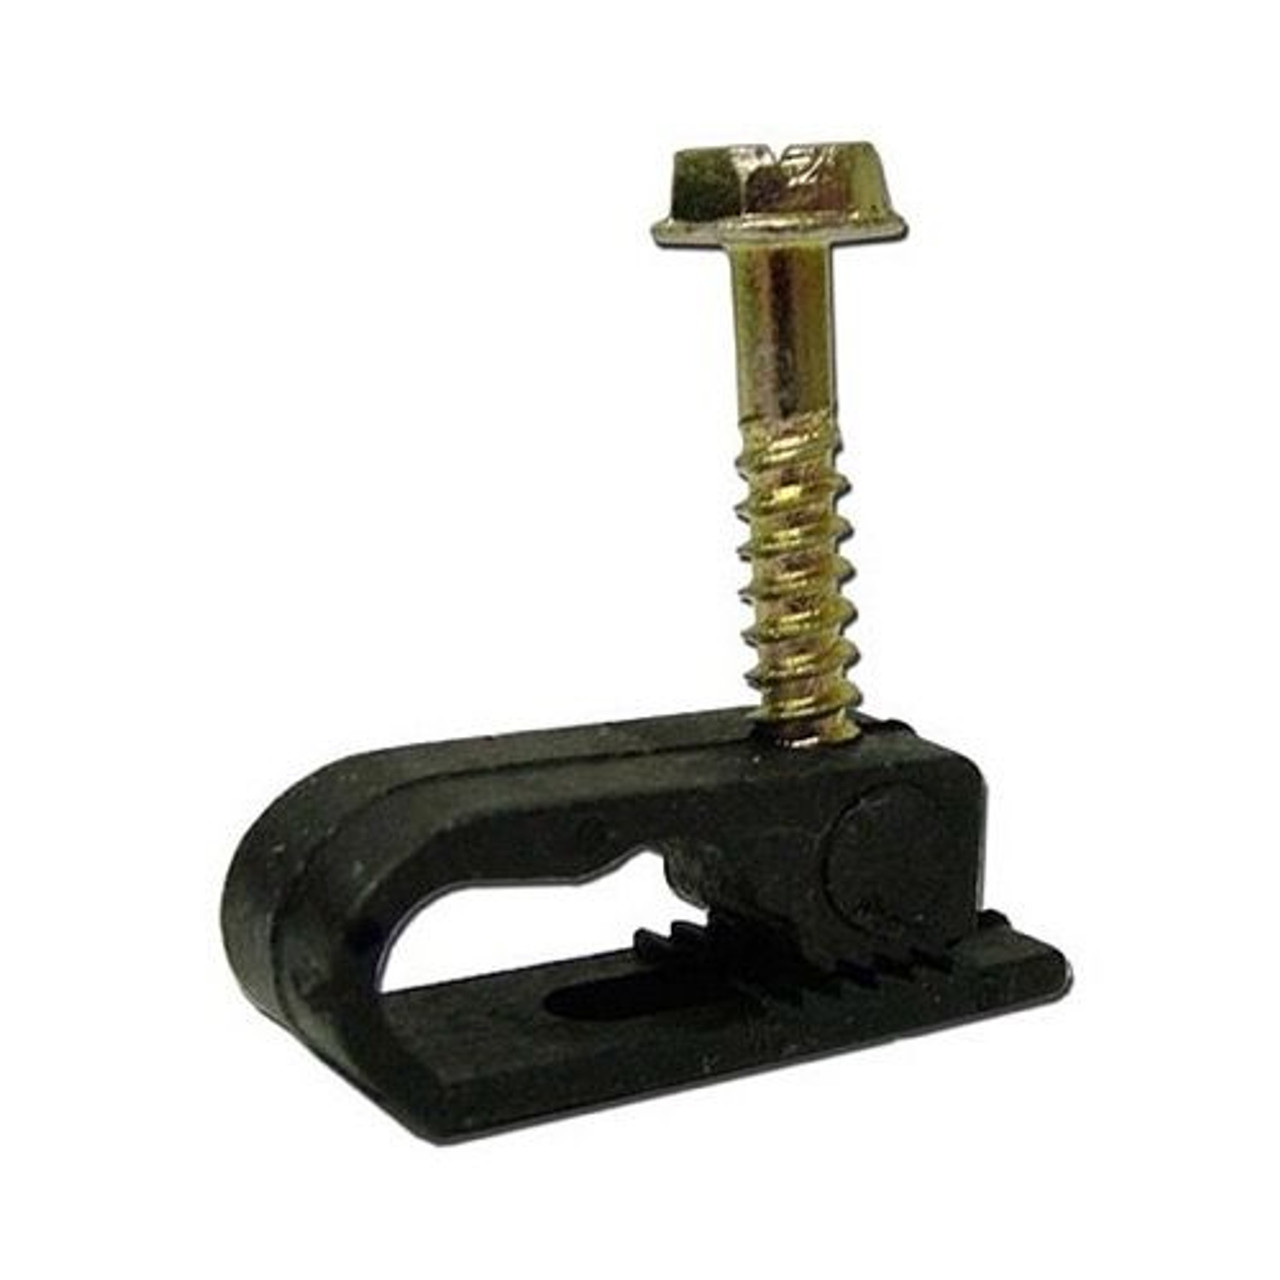 Steren 200-964BK Flex Clip Dual Coaxial Cable Strap Fastener Clamp RG6 1/2" Screw In Holder Straps Digital Video Satellite HDTV Antenna RG-6 Signal Fasteners, Sold as Singles, Part # 200964-BK